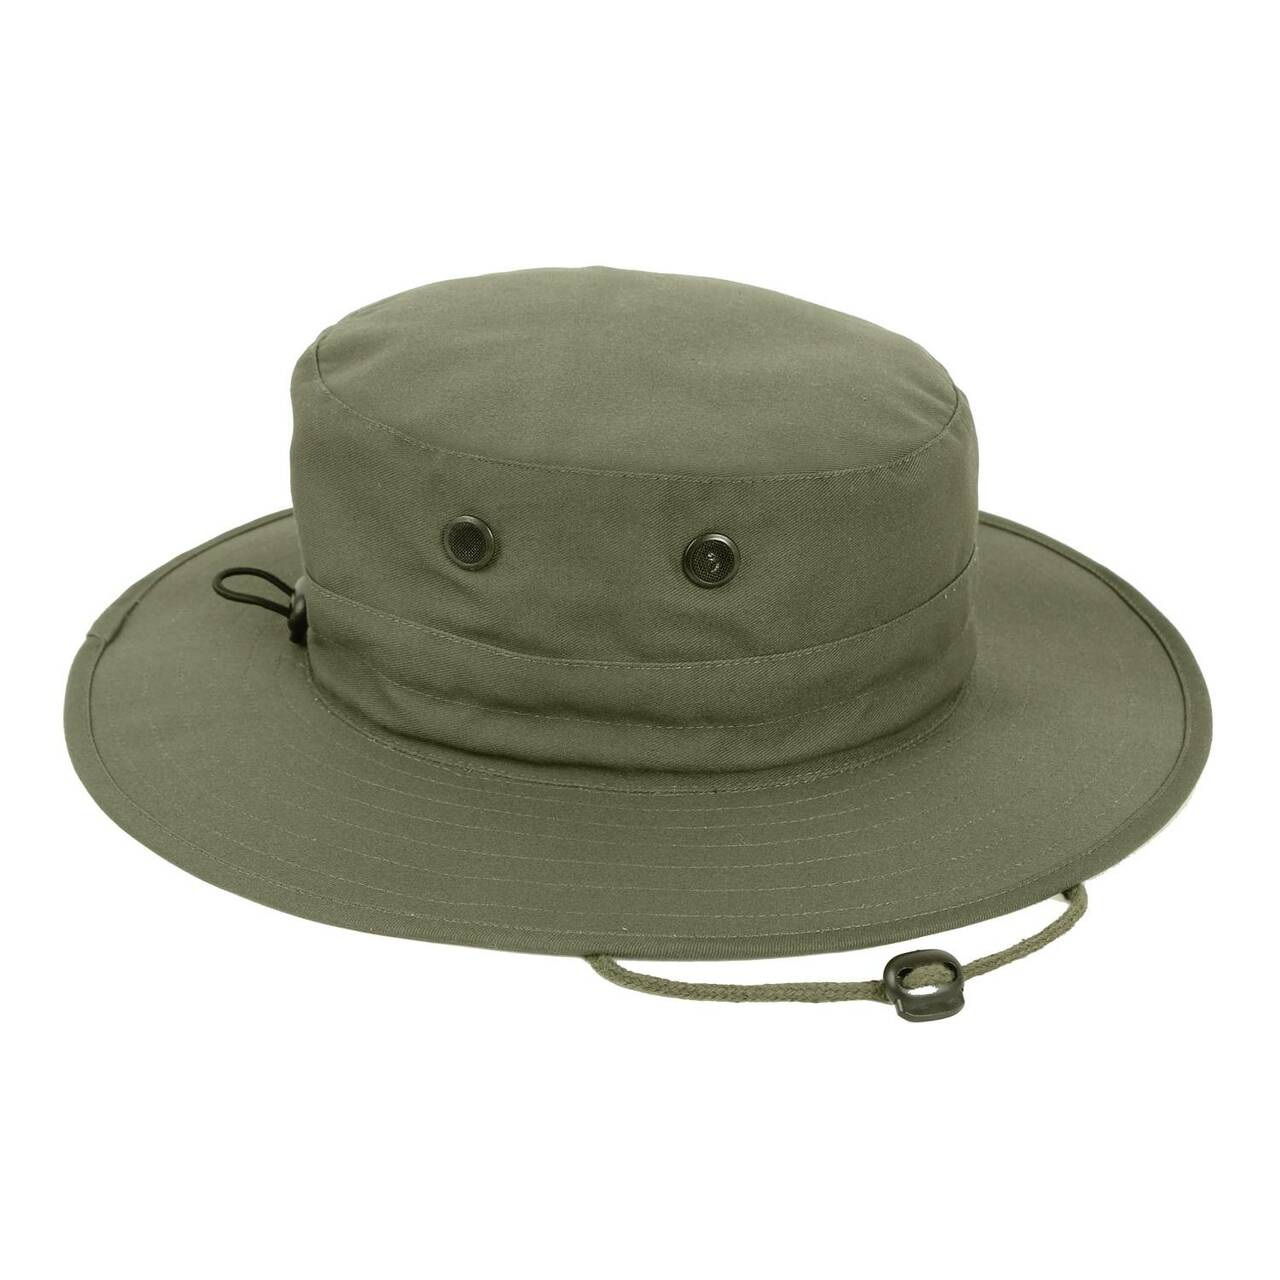 Rothco Adjustable Boonie Hat - Multicam